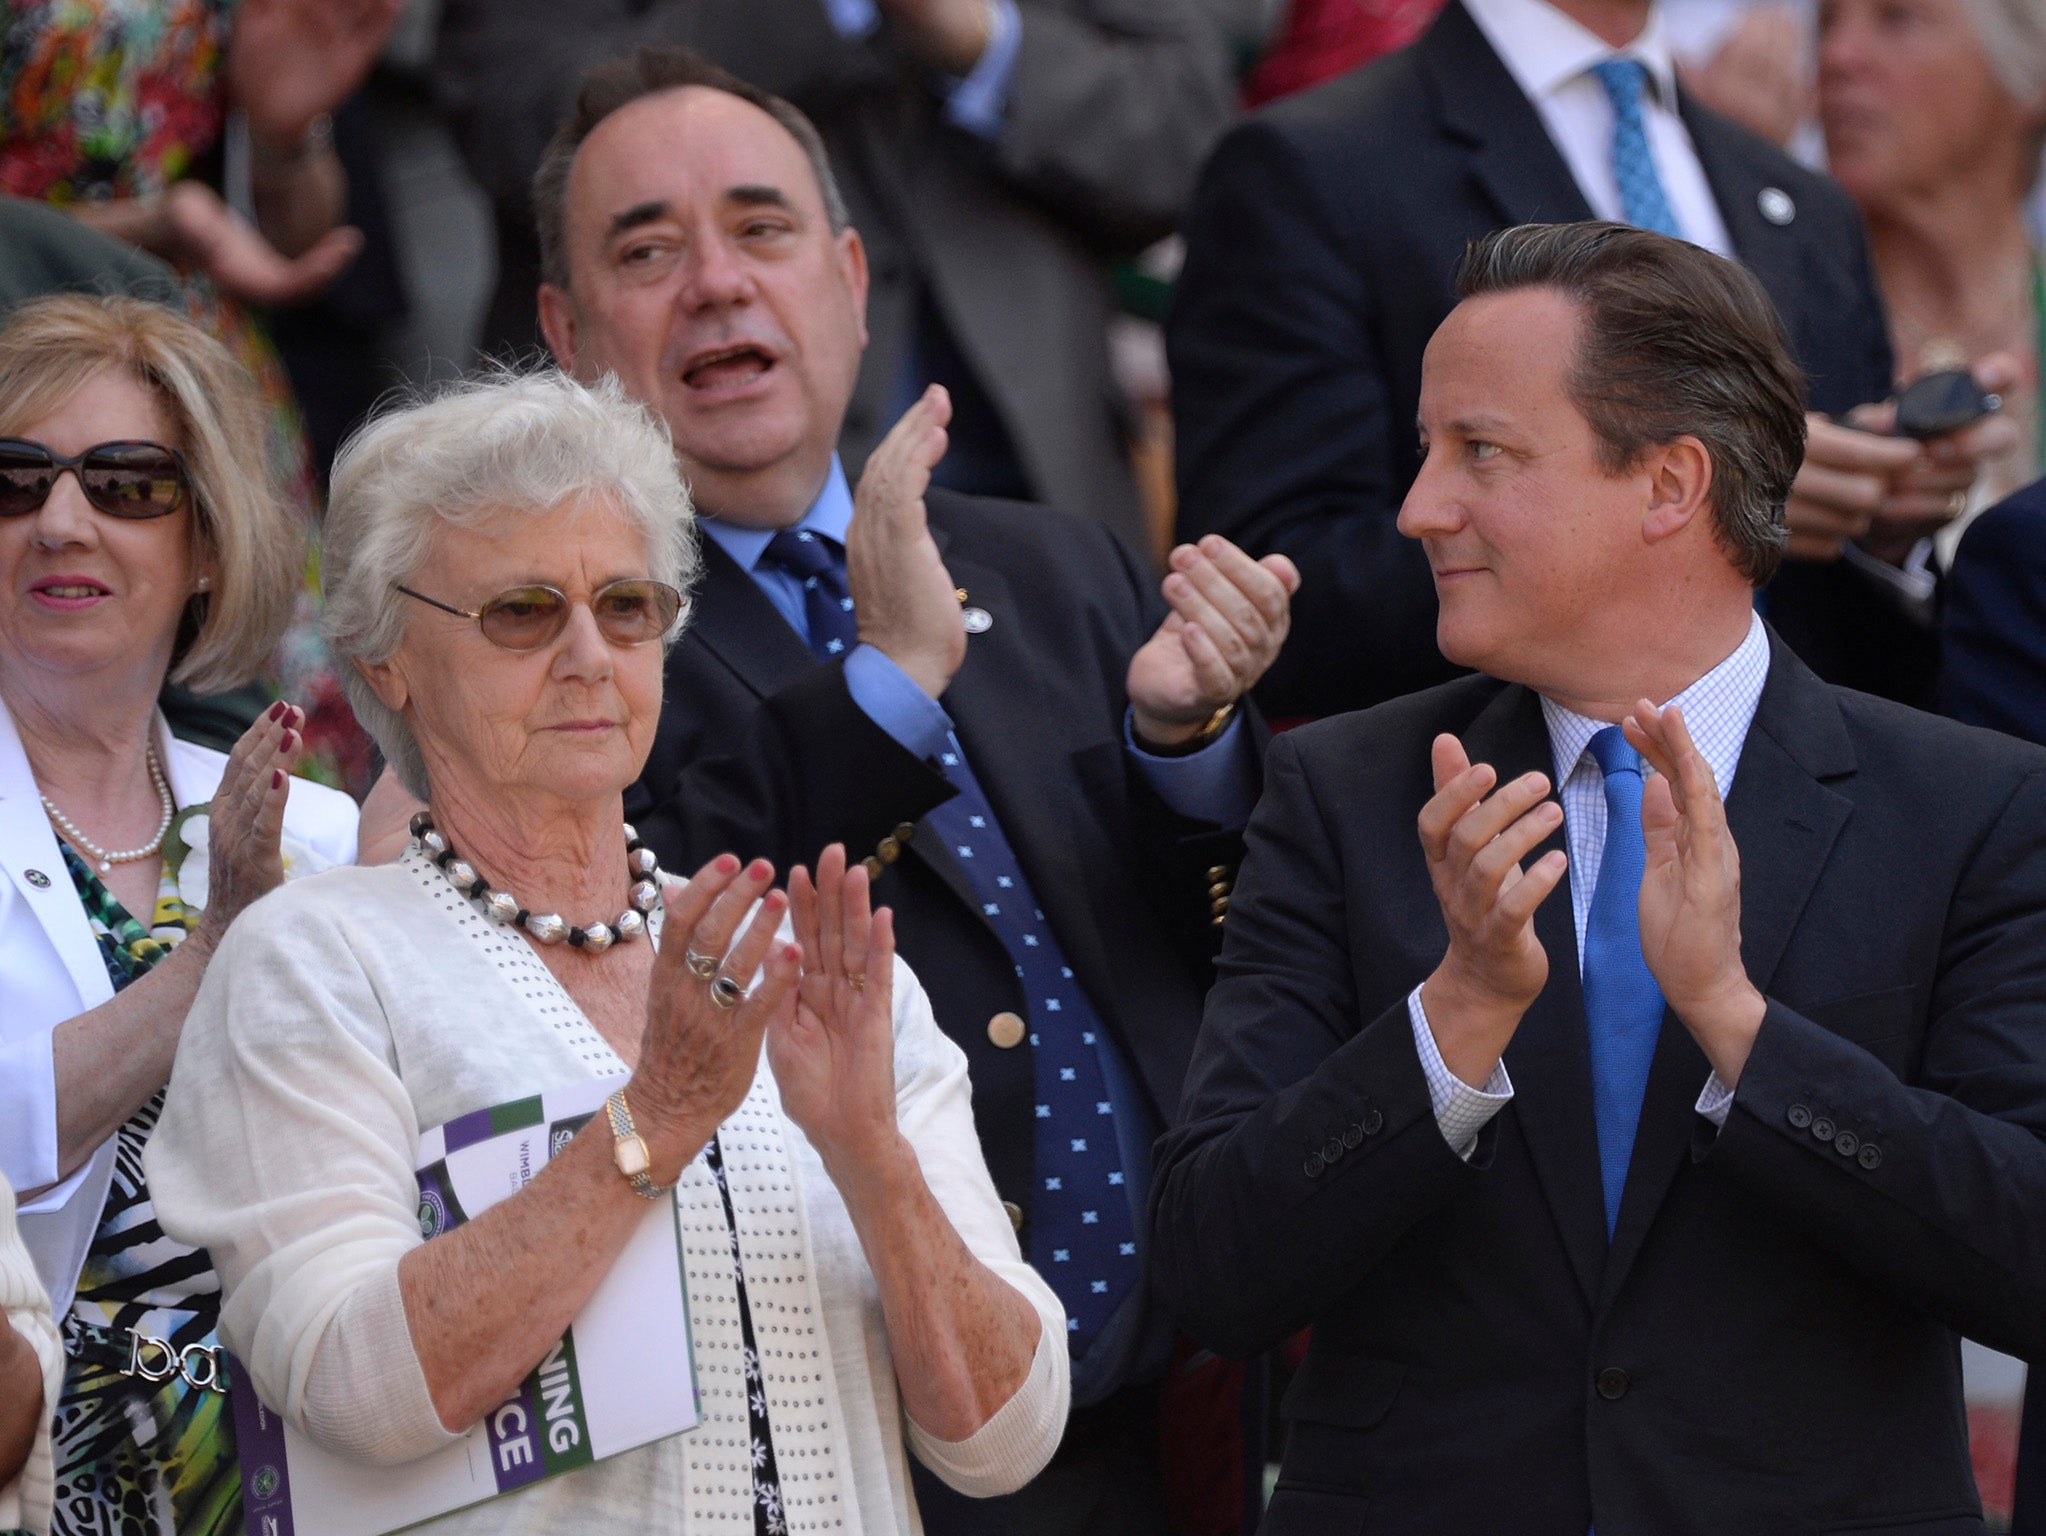 It was reported last week that Cameron's mother (above) and aunt signed a petition against the local cuts